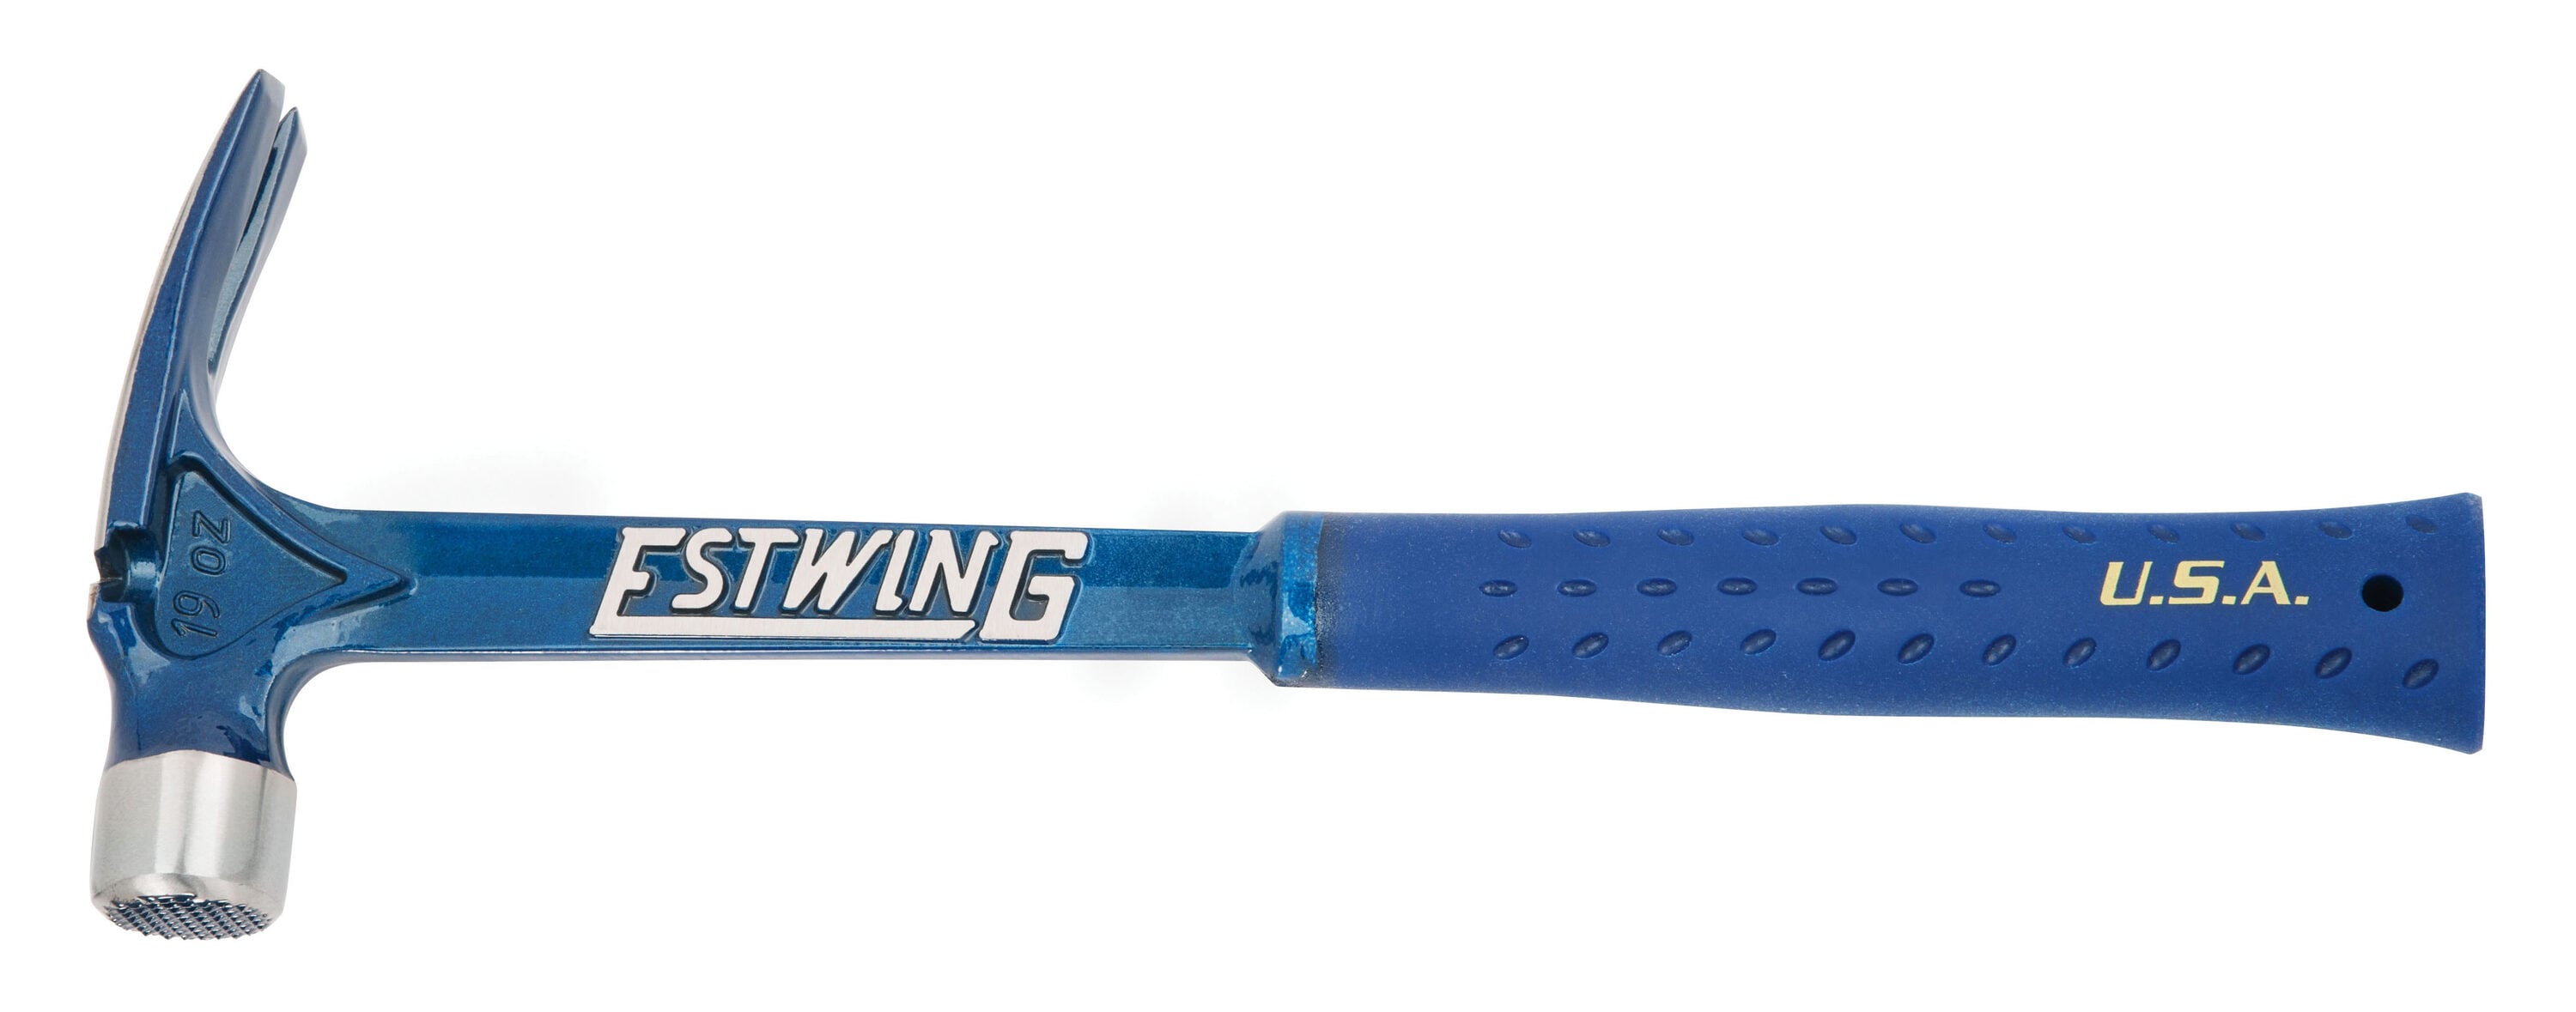 Estwing 19-oz Milled Face Steel Head Steel Framing Hammer in the 